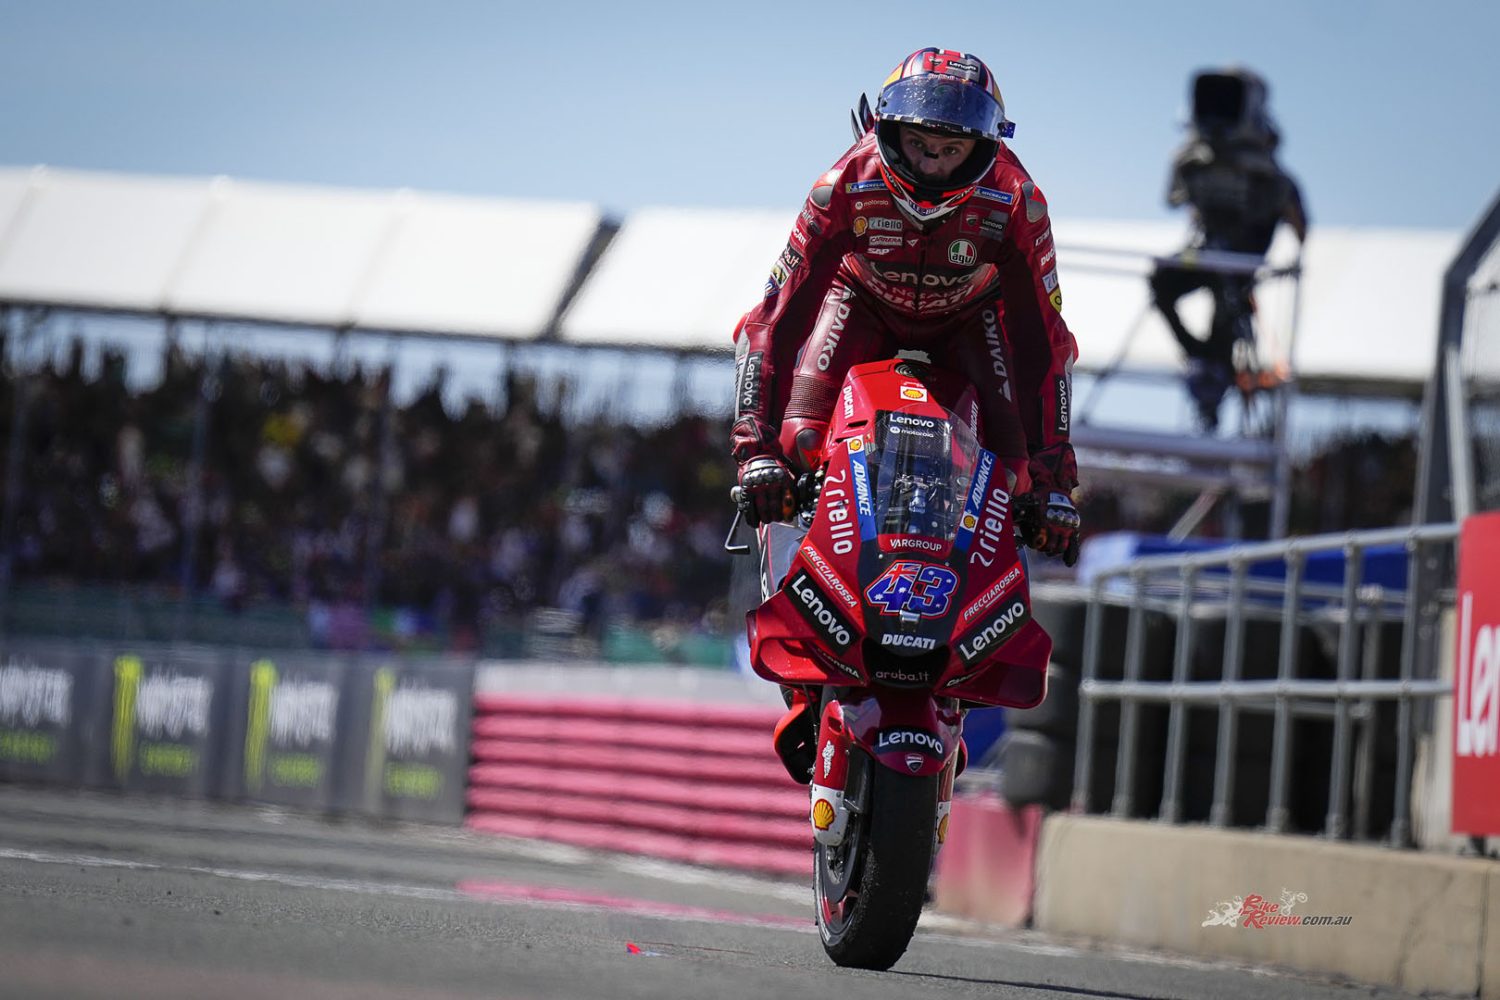 Showing great consistency and riding with a nice blend of intensity, composure and intelligence, Jack Miller's two consecutive podiums in August have been a joy to watch. 